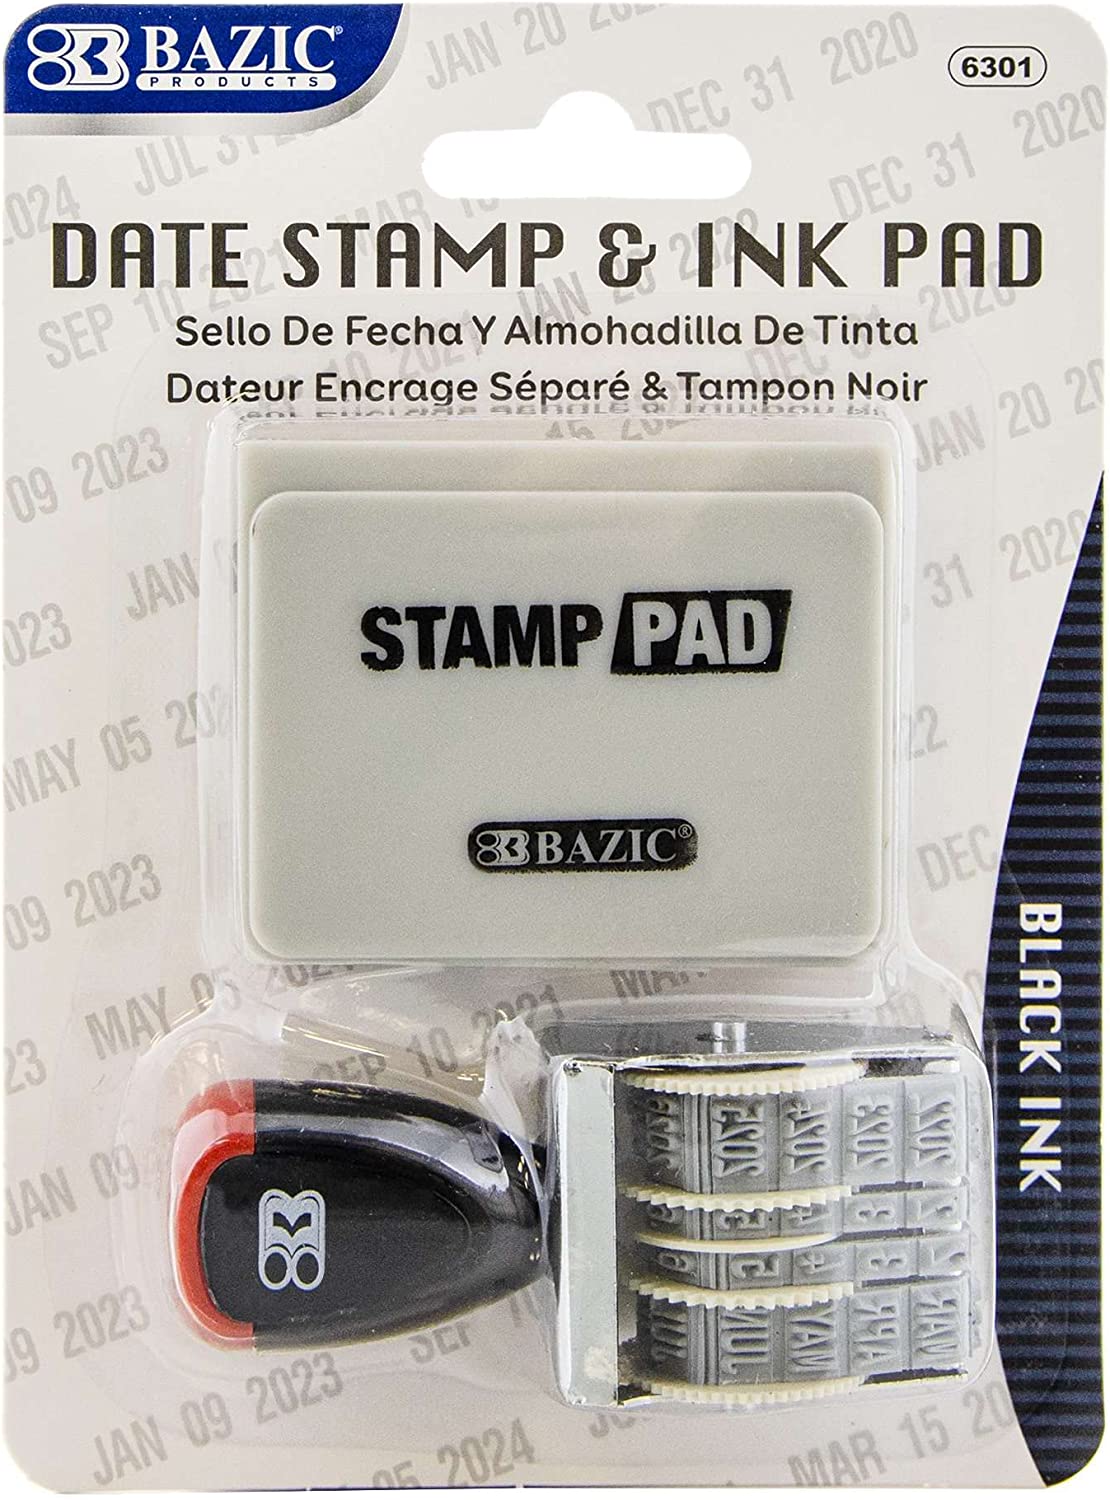 BAZIC Date Stamp and Ink Pad - Black Ink, Stamp Impression Size 1 Inch x 0.15 Inch, Office, Shipping, Receiving, Accounting